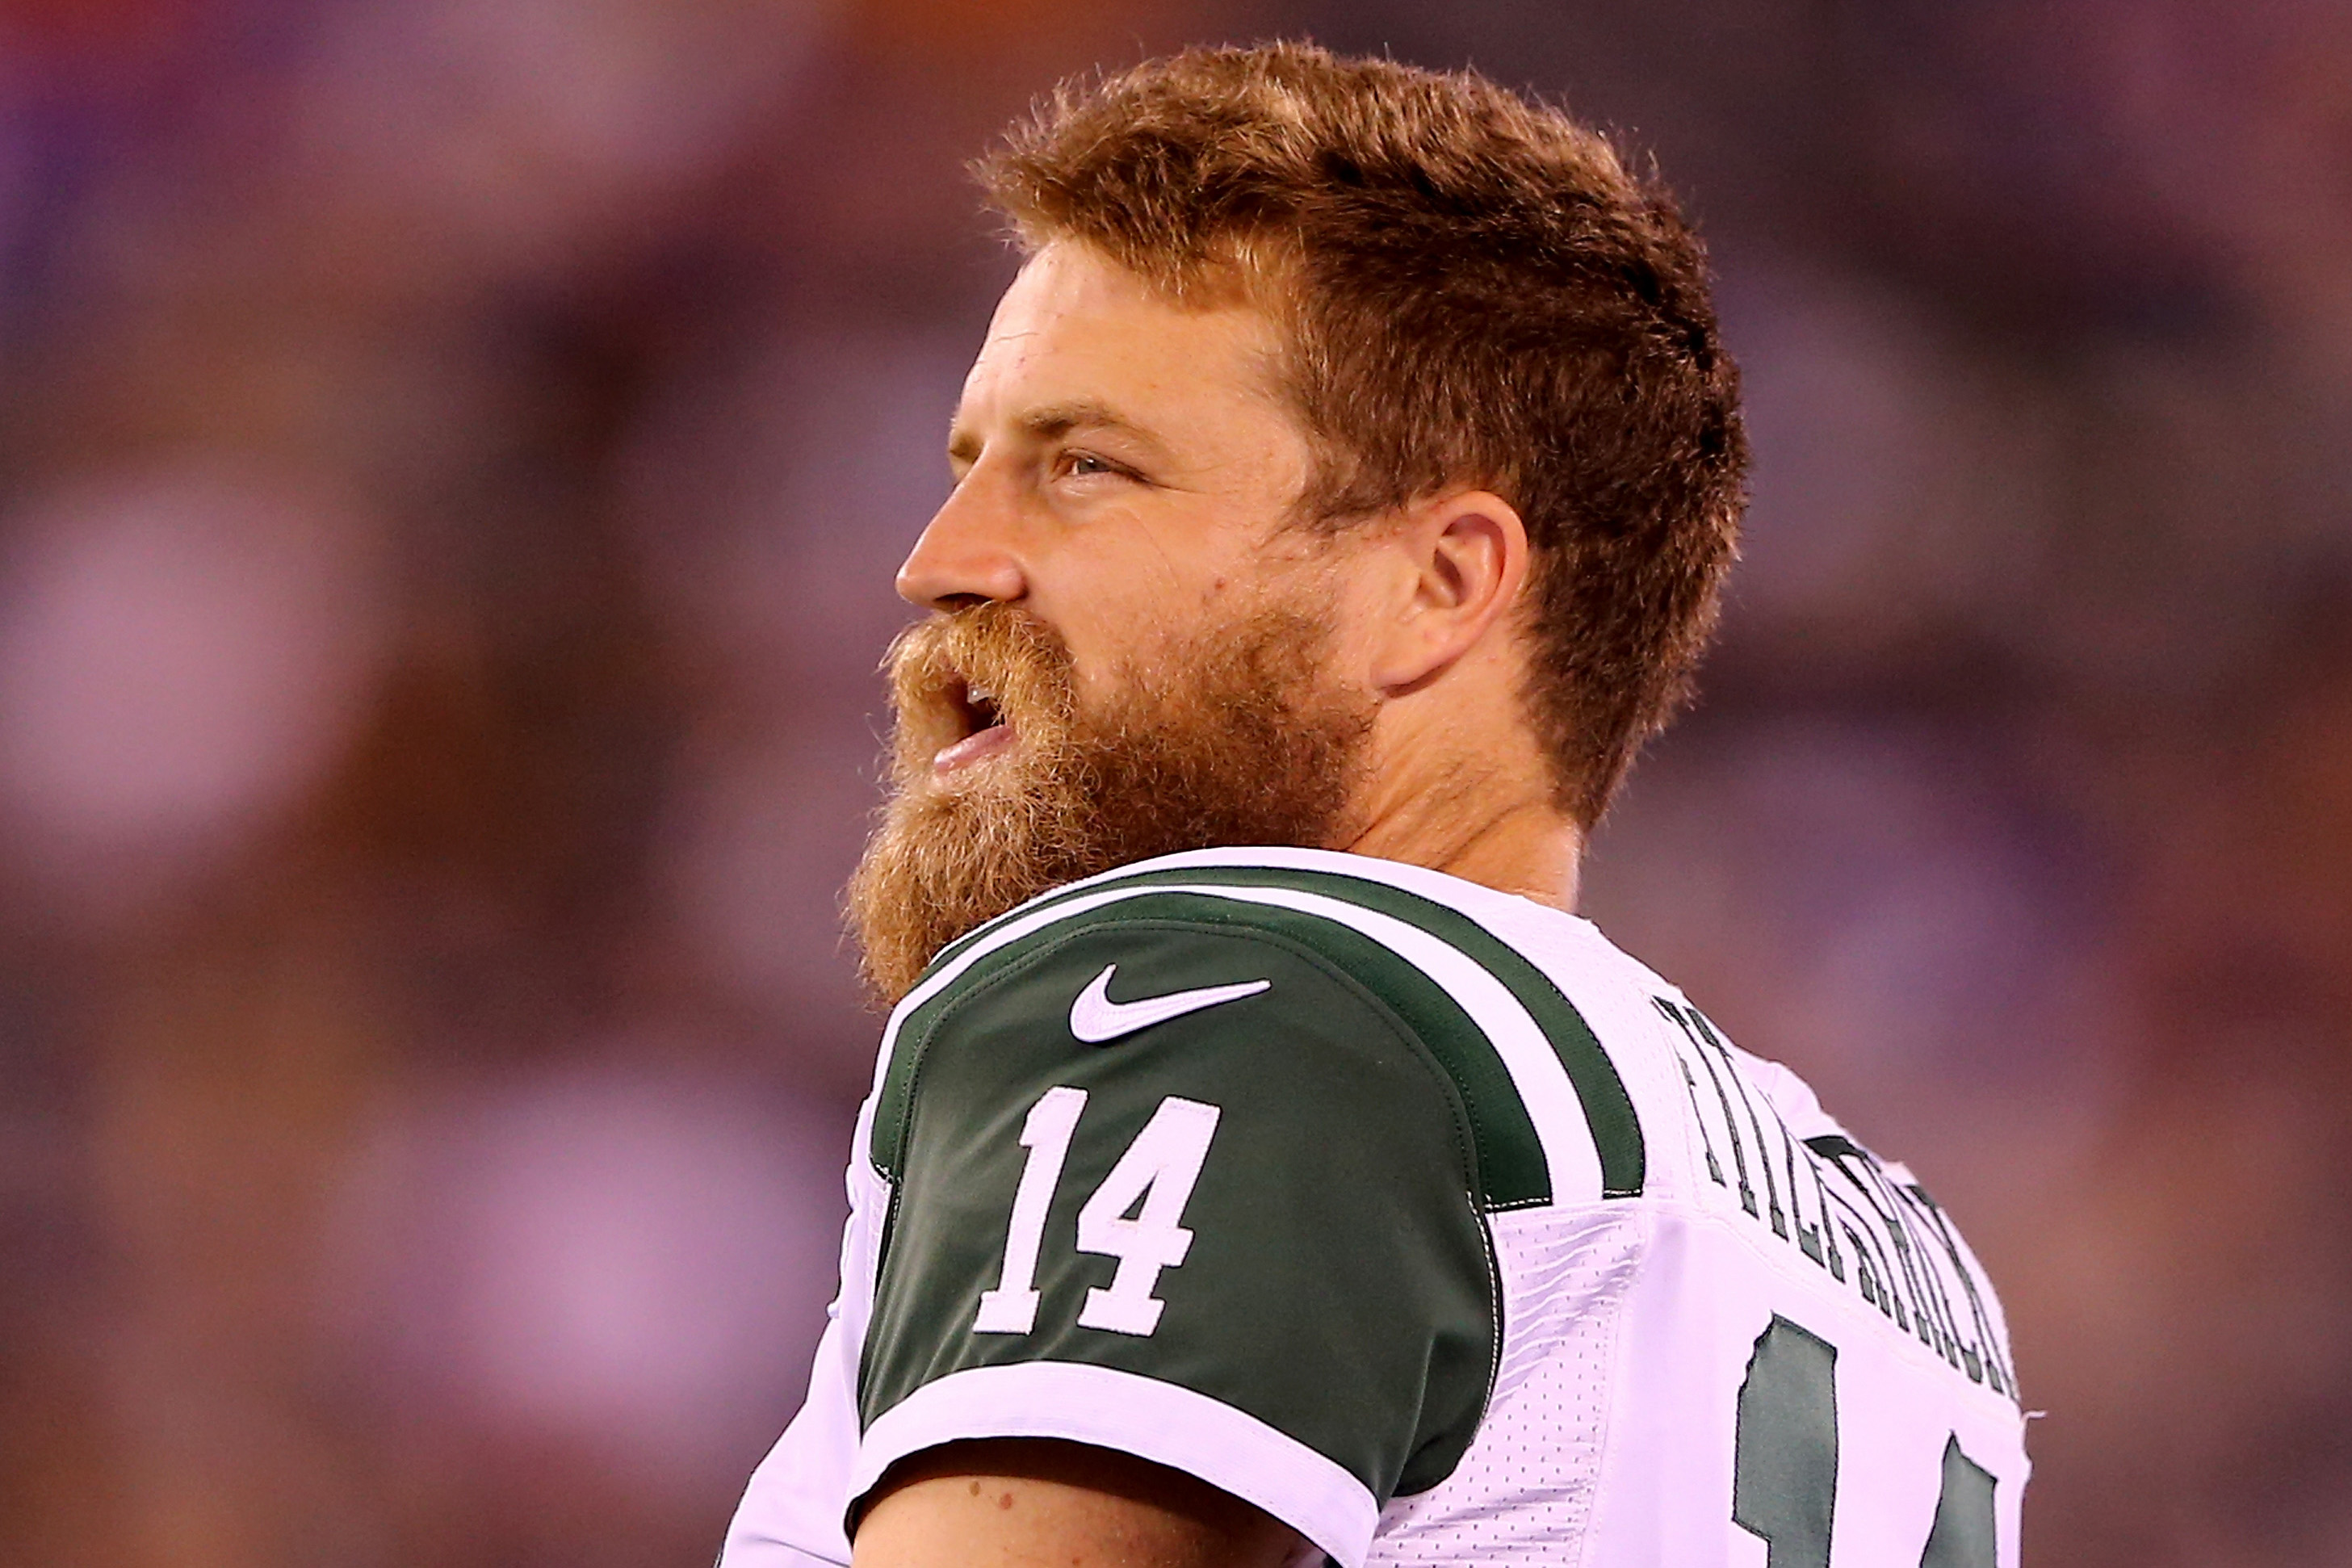 EAST RUTHERFORD, NJ - AUGUST 29:  Ryan Fitzpatrick #14 of the New York Jets looks on from the bench in the fourth quarter against the New York Giants during preseason action at MetLife Stadium on August 29, 2015 in East Rutherford, New Jersey.  (Photo by Elsa/Getty Images)